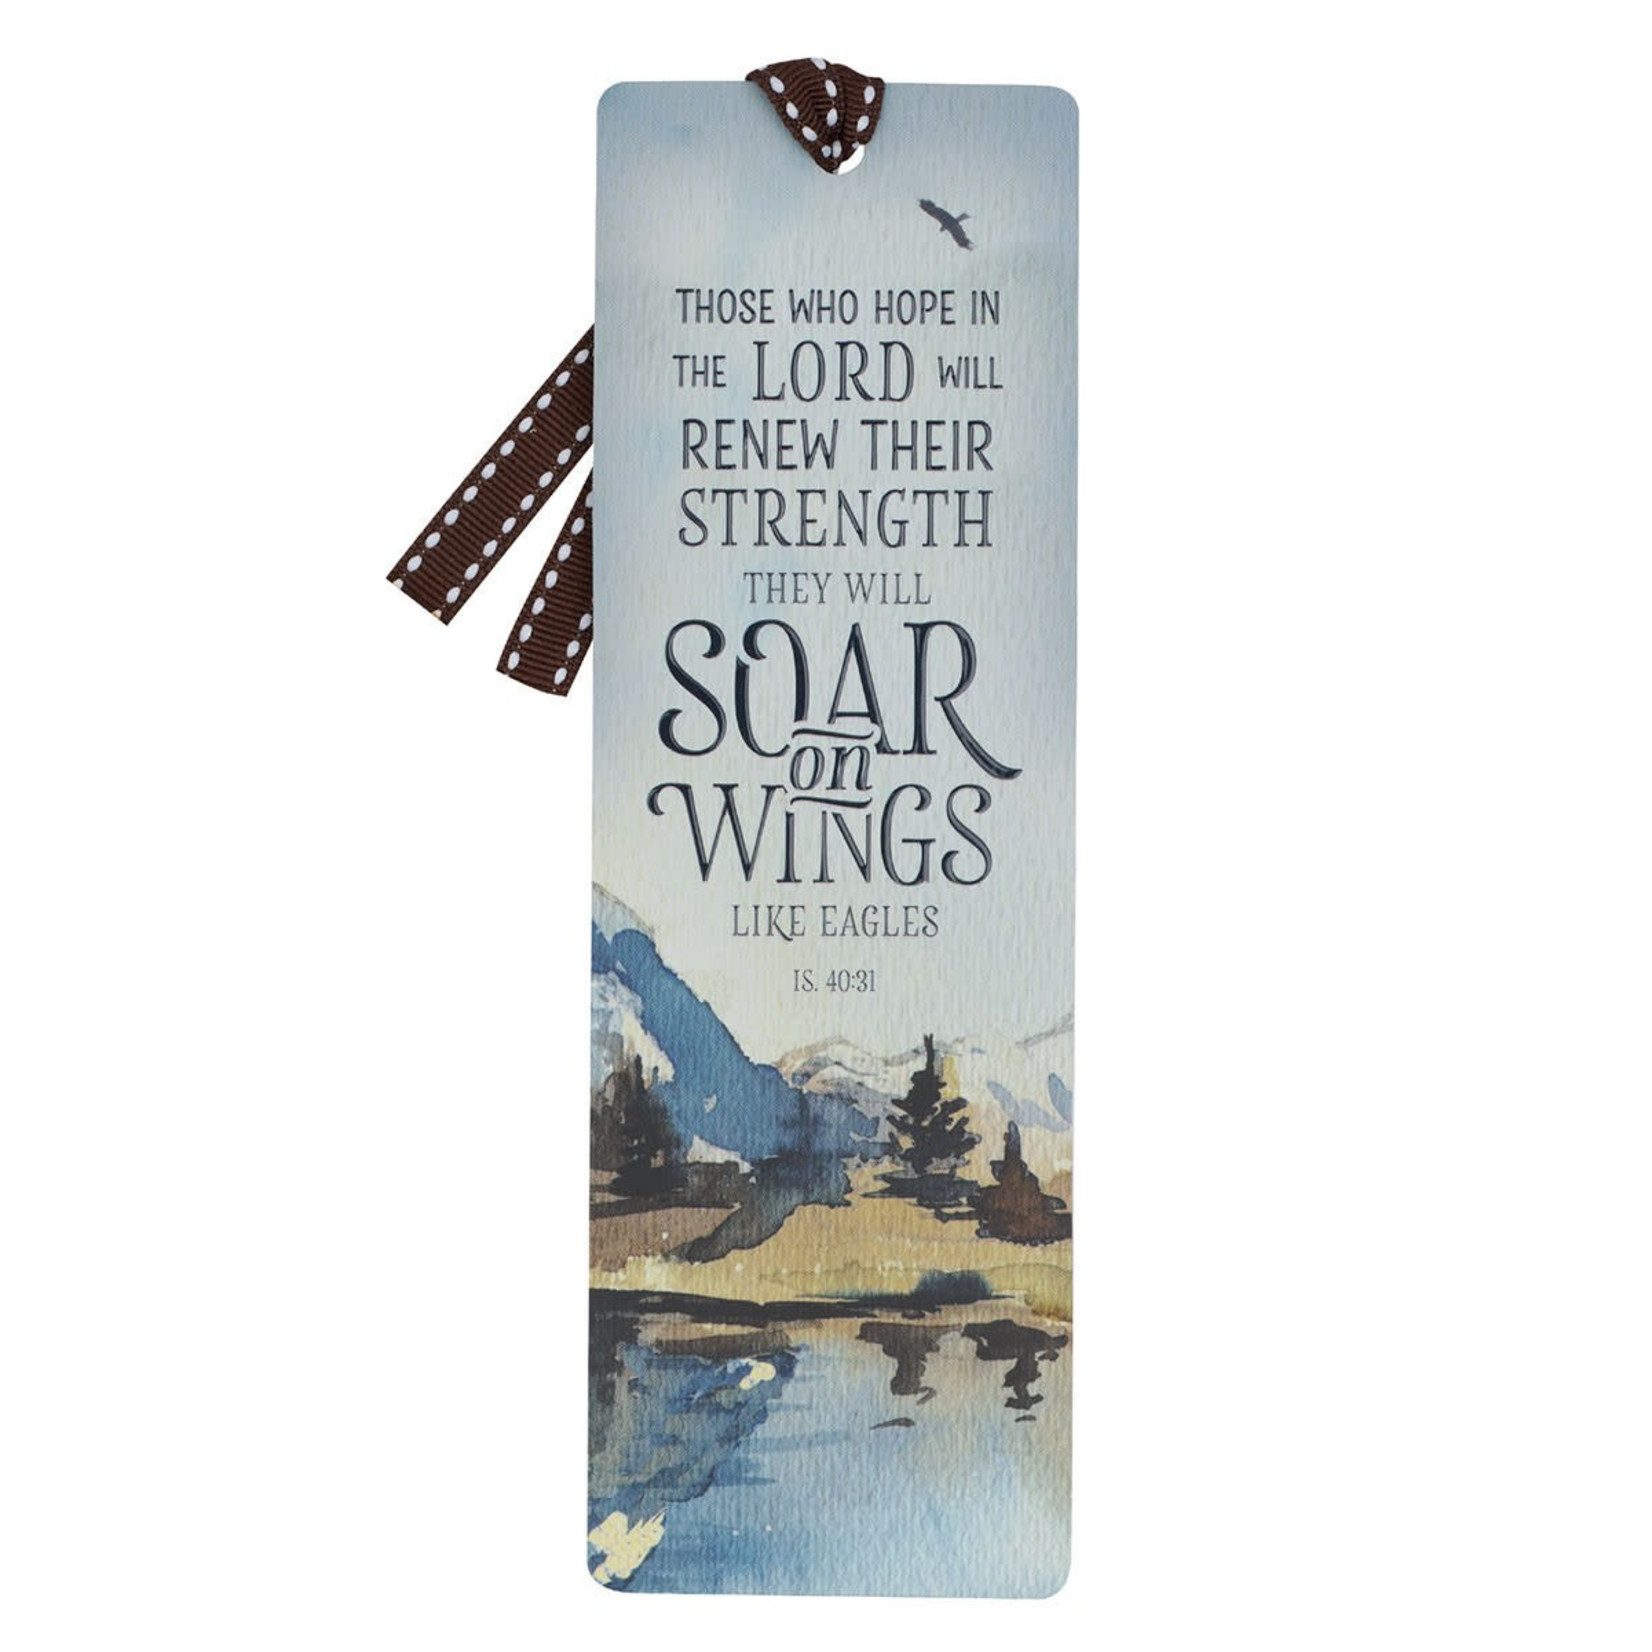 Christian Art Gifts FBM007 They Will Soar on Wigs Bookmark